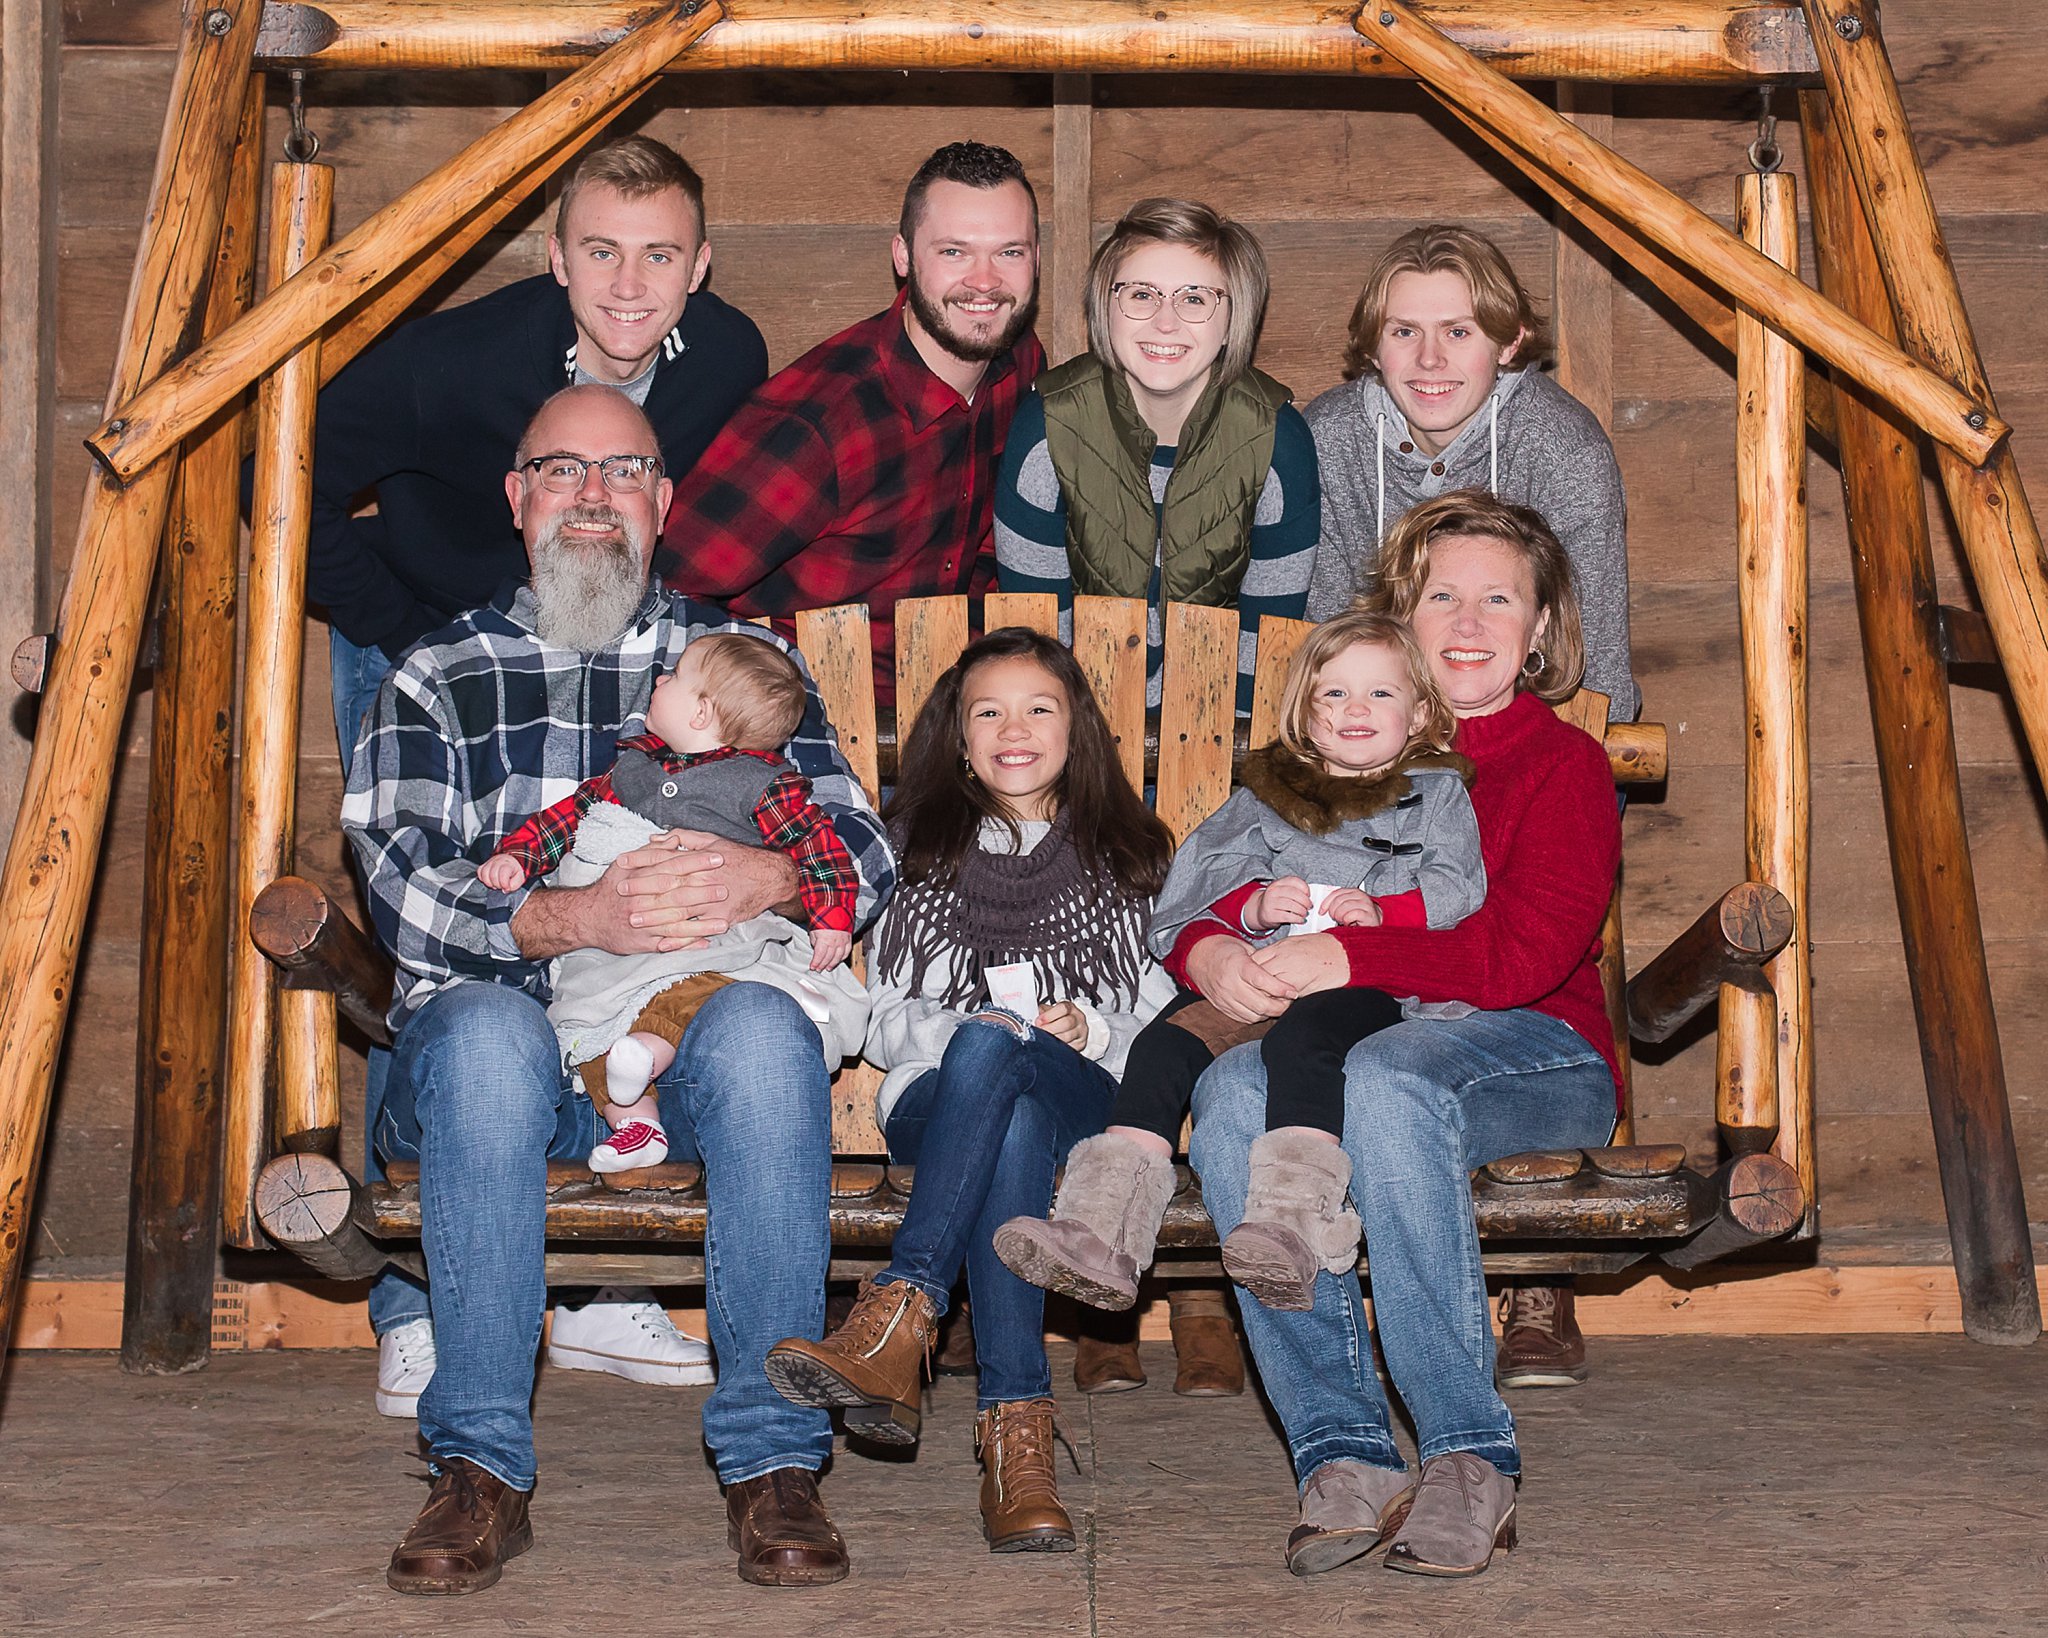 Family Session at Stauffer Farms